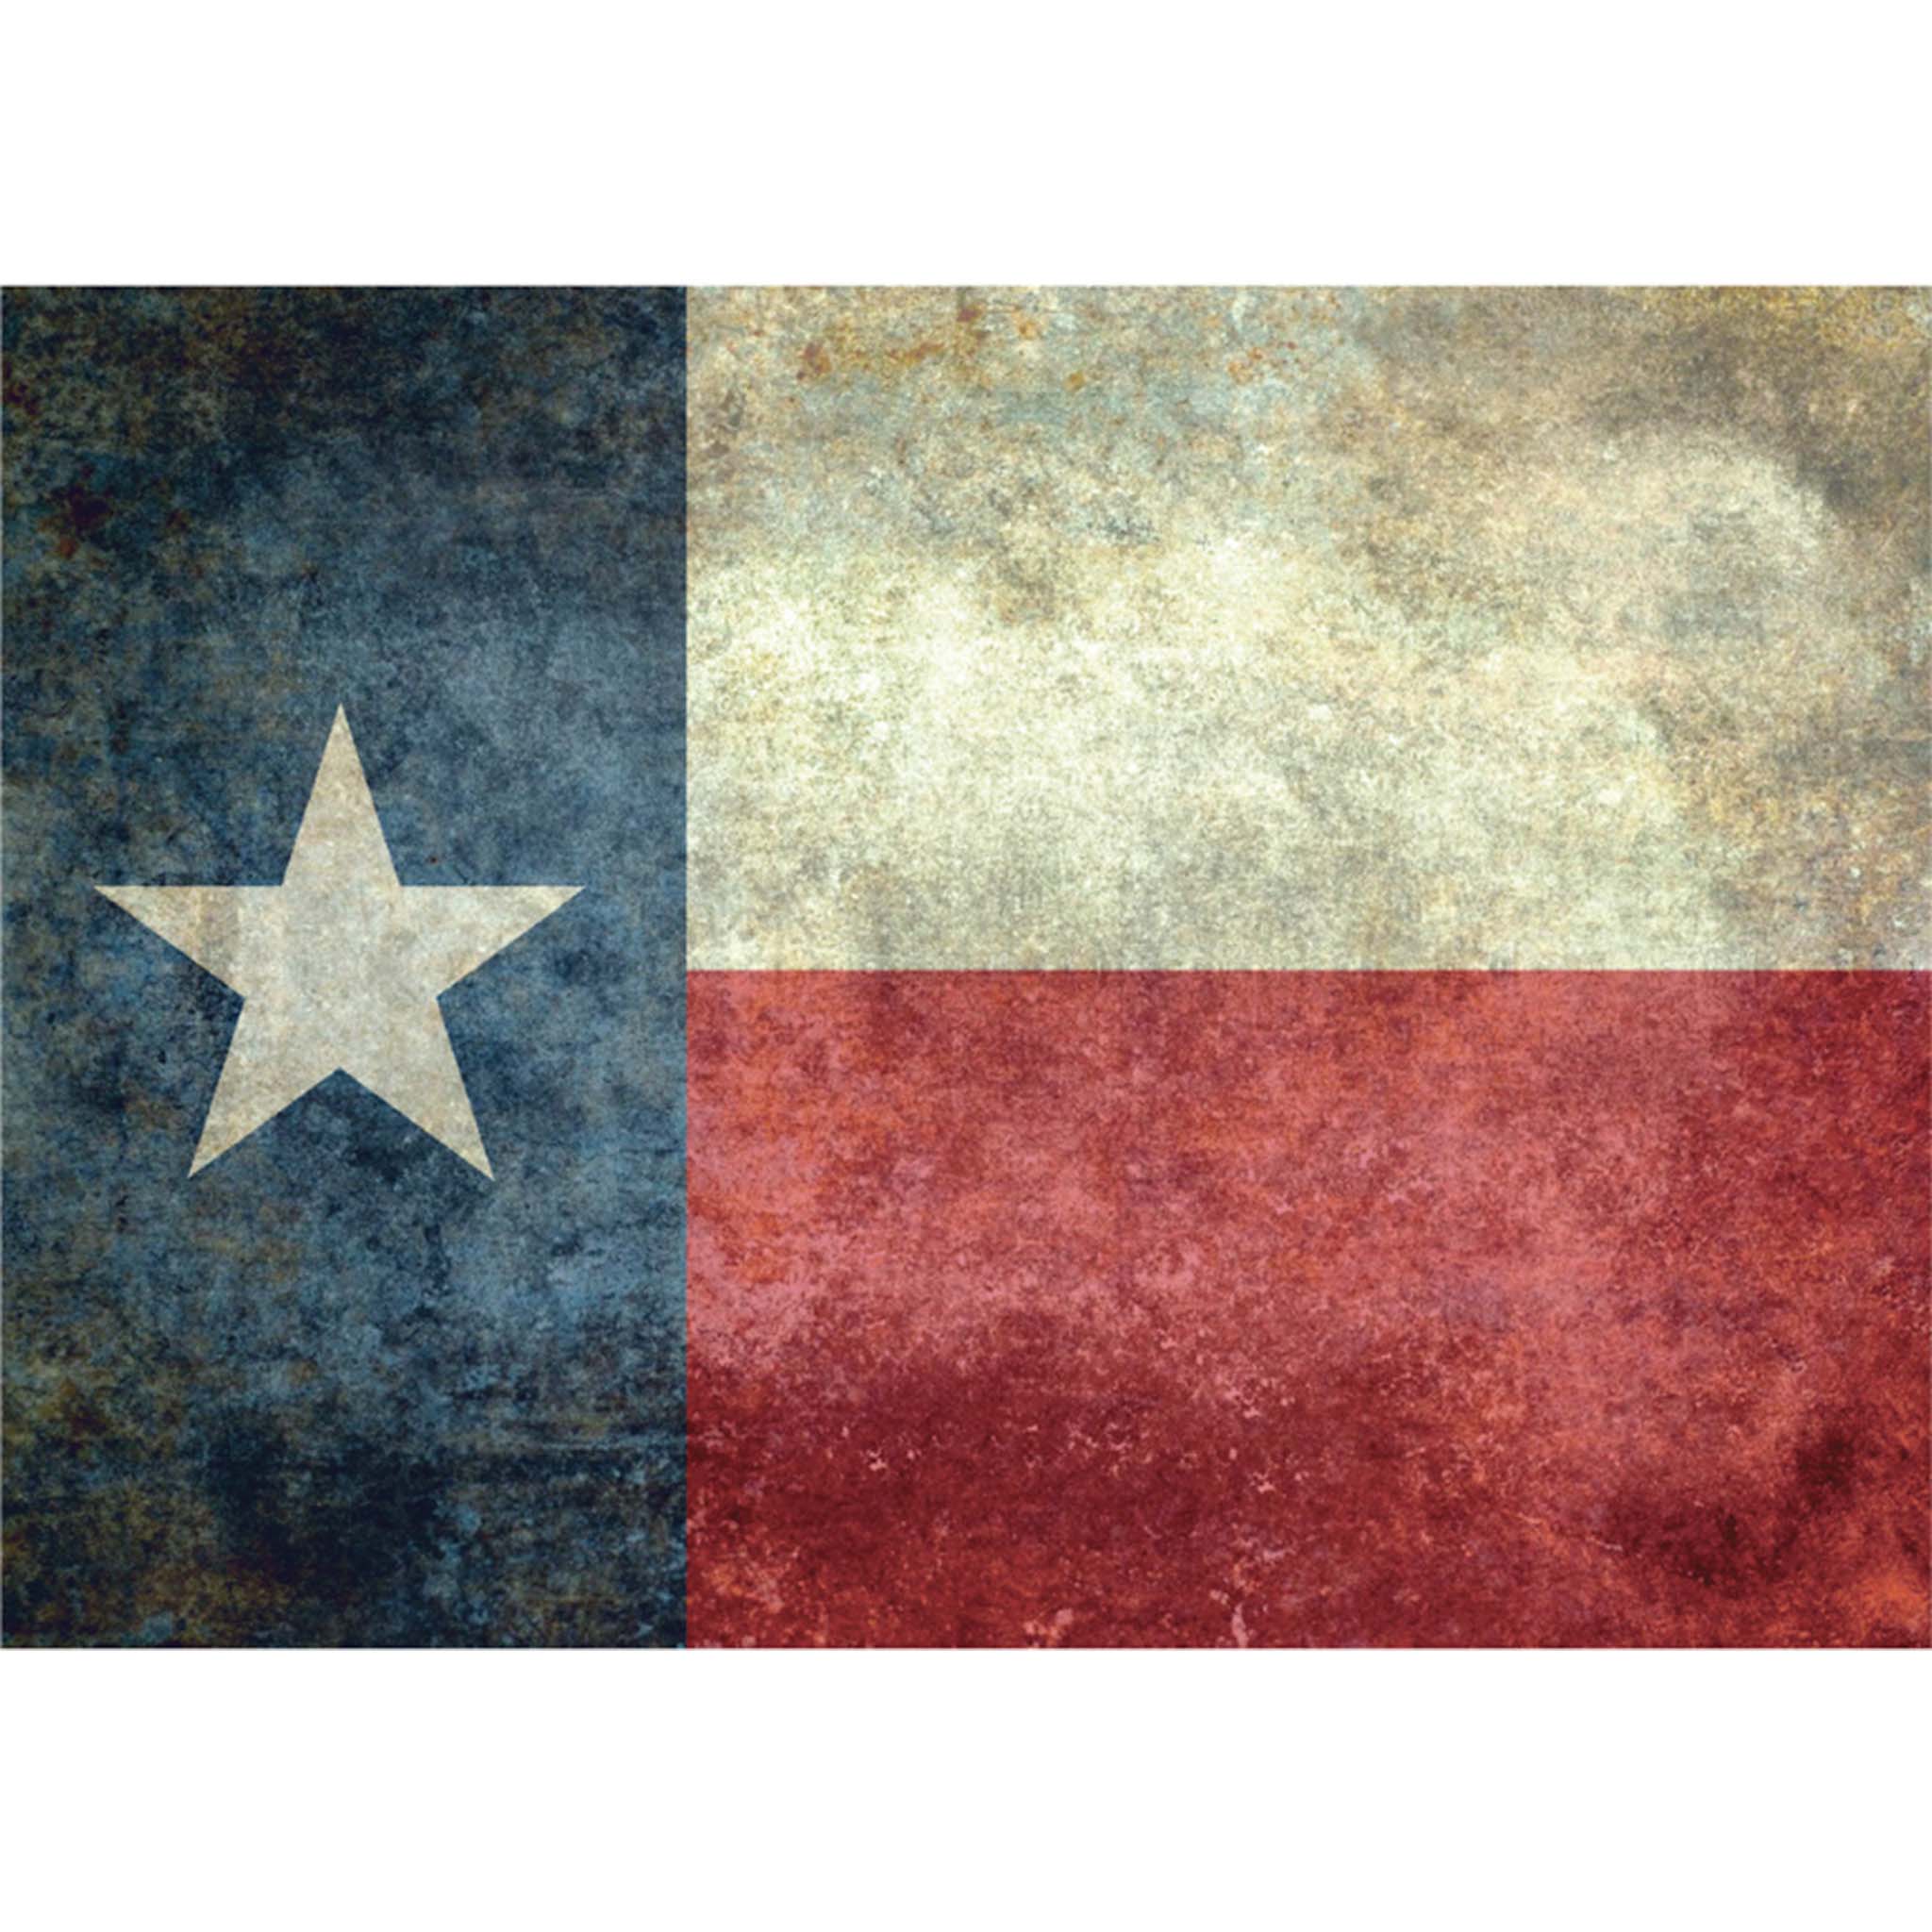 A1 fiber paper that features a distressed Texas flag. White borders are on the top and bottom.